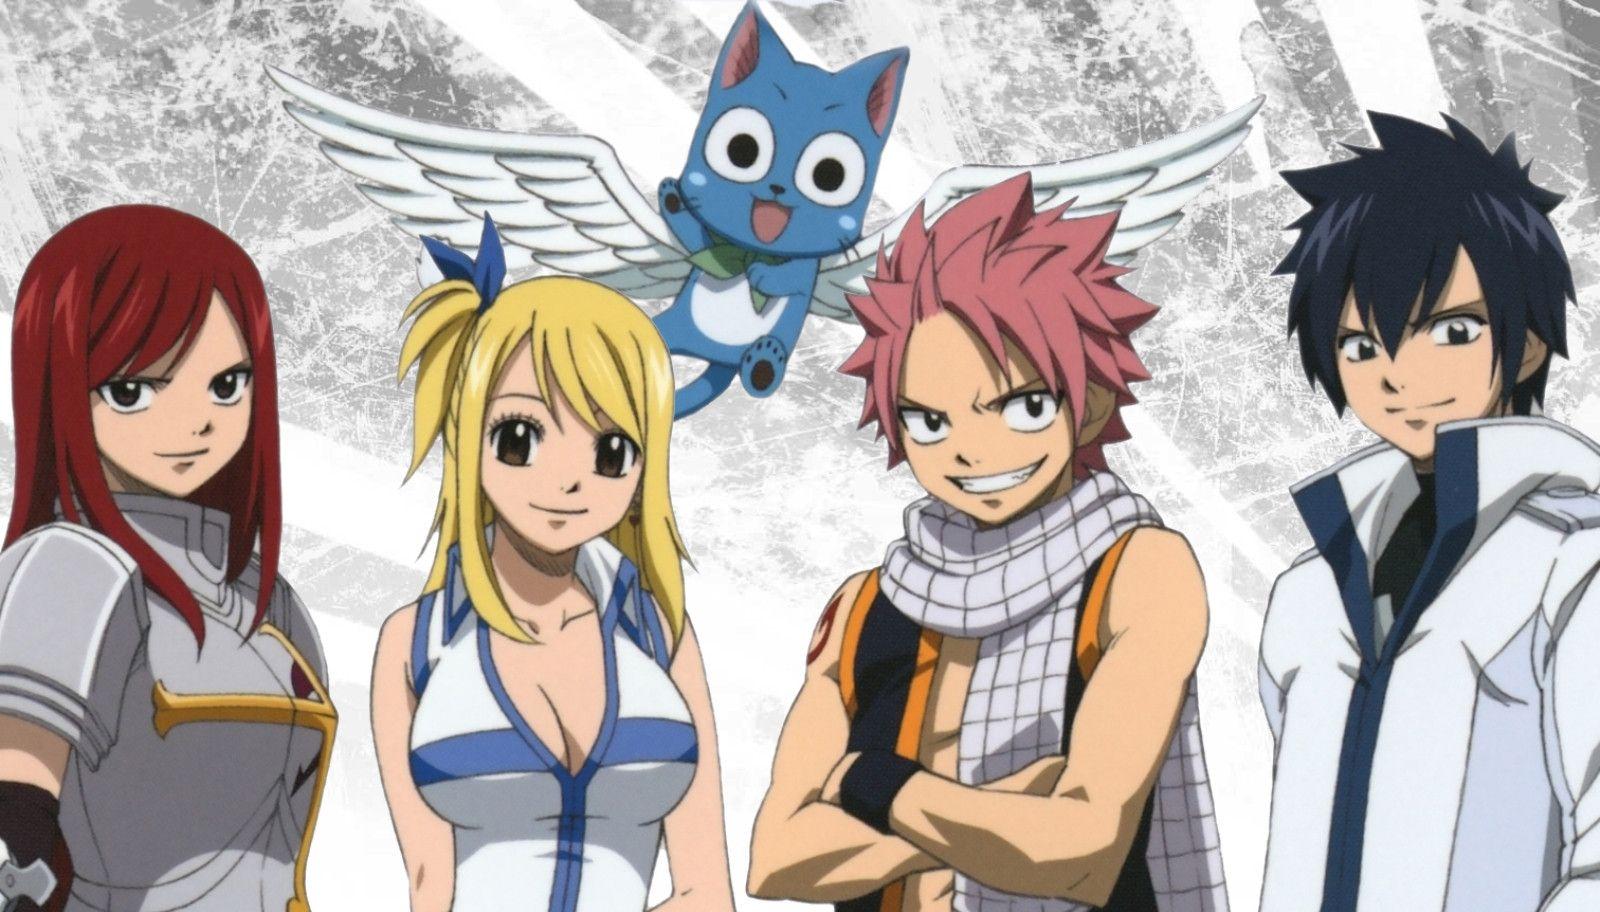 Fairy Tail Wallpaper Free Download Anime Wallpaper HD Fairy Tail